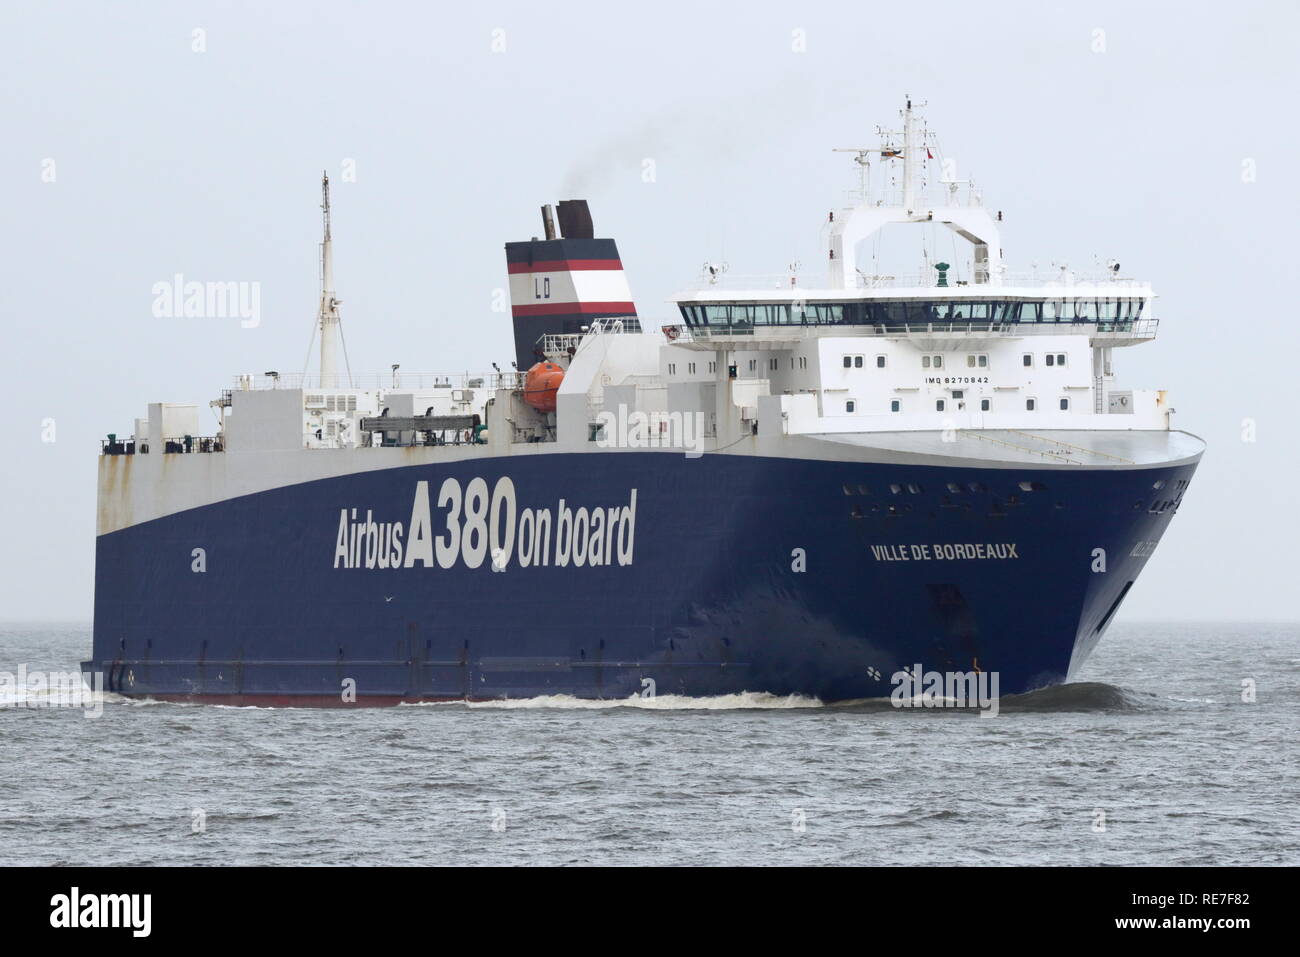 The Airbus Ro-Ro ship Ville de Bordeaux passes on December 30, 2018 Cuxhaven and continues towards Hamburg. Stock Photo